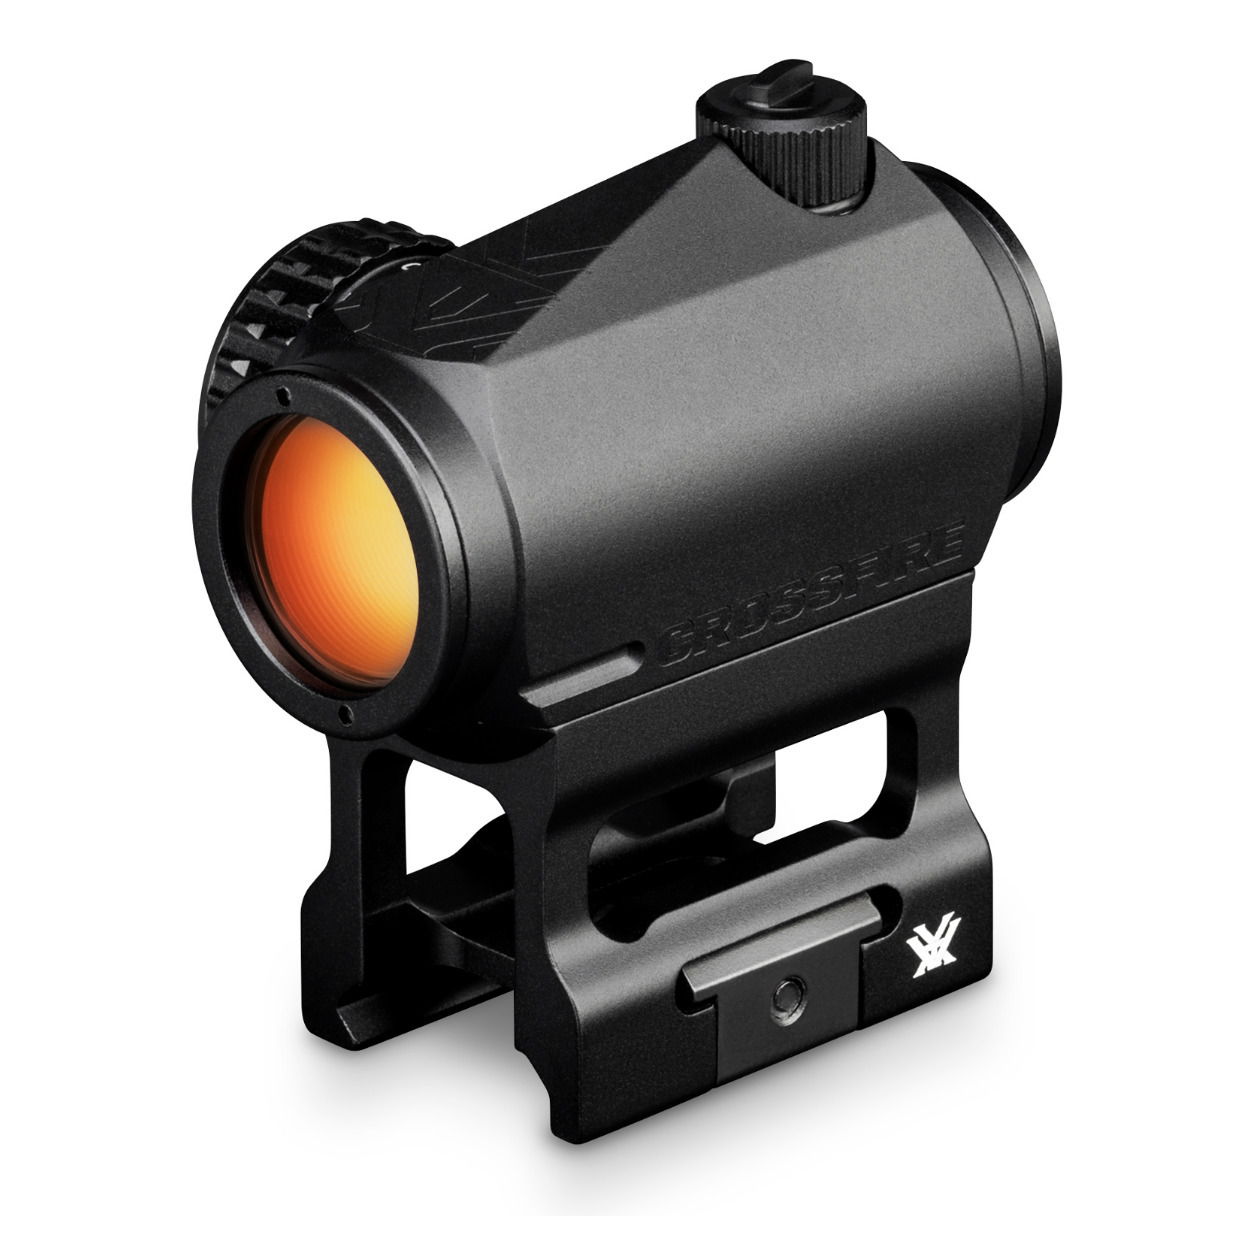 Vortex Crossfire Red Dot Sight (2 MOA Dot Reticle) w/45 Degree Mount